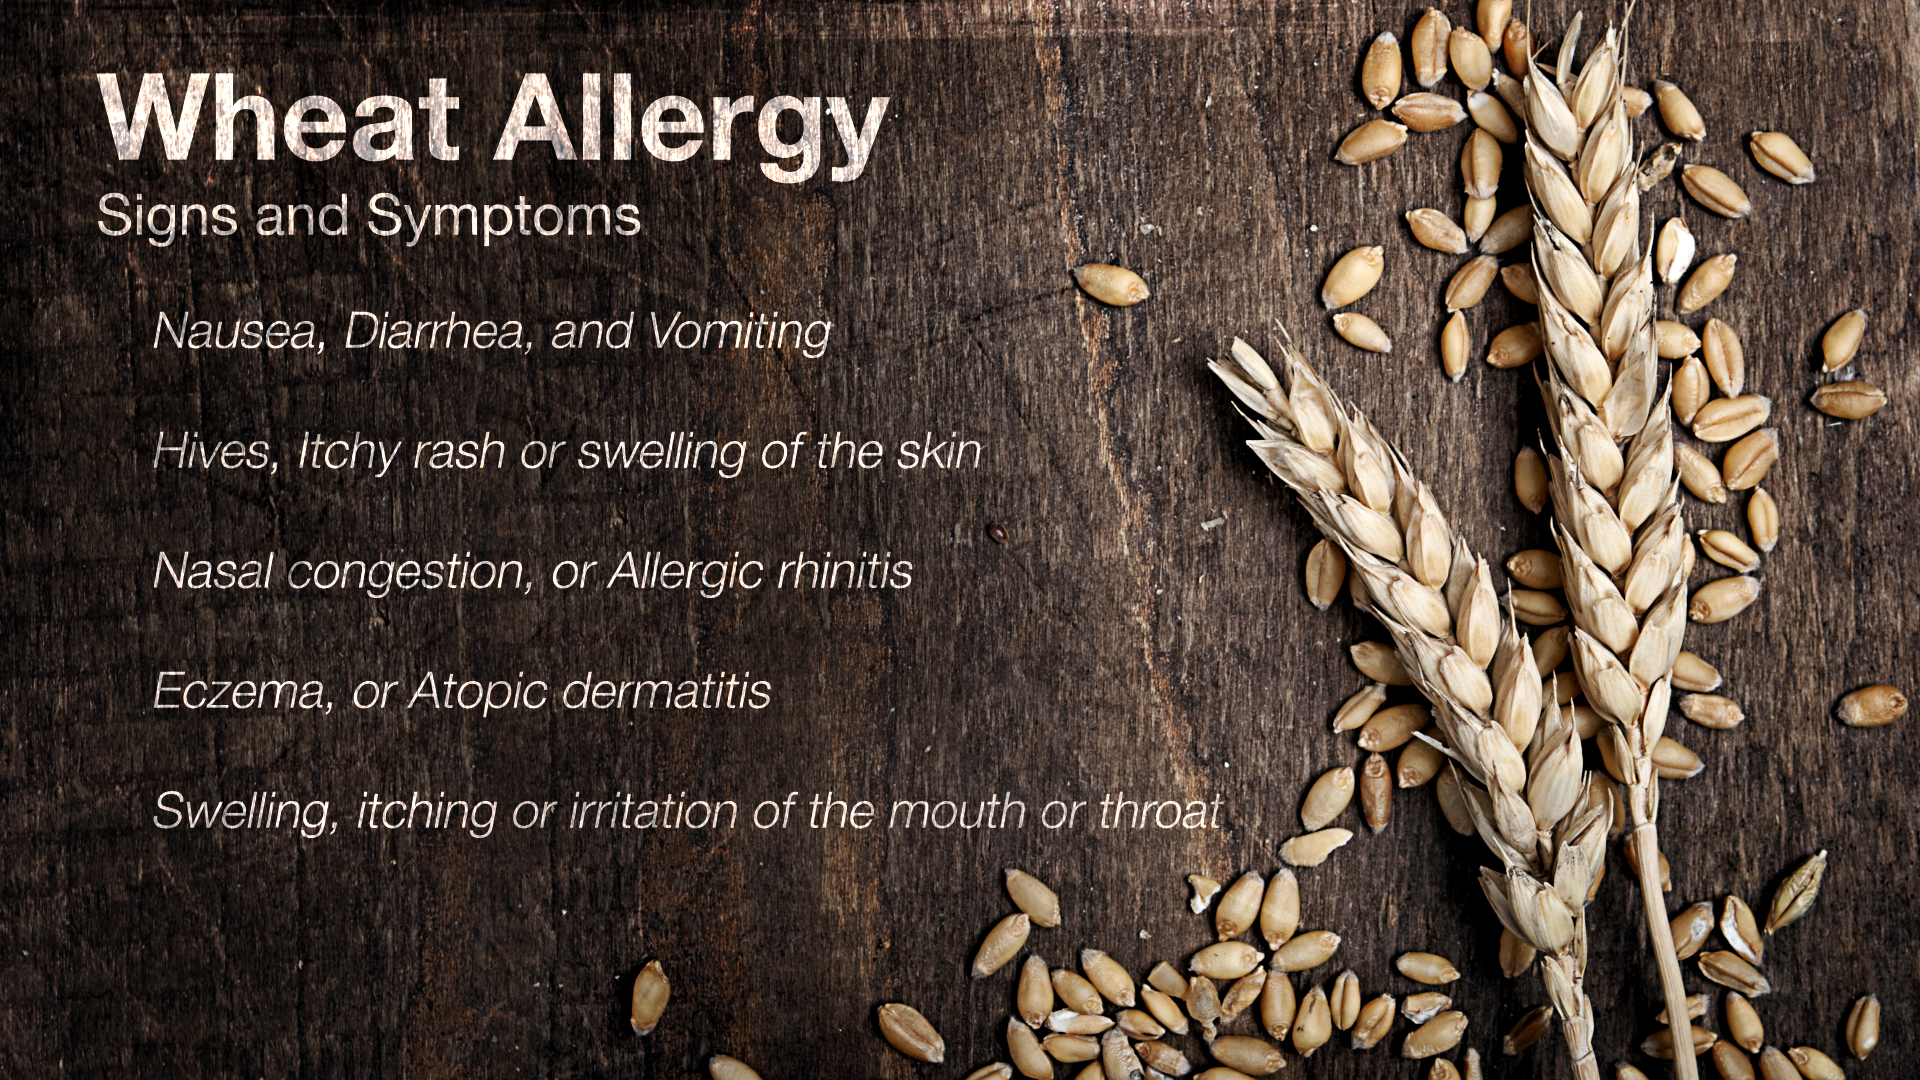 Medical animation still shot showing symptoms of Wheat Allergy